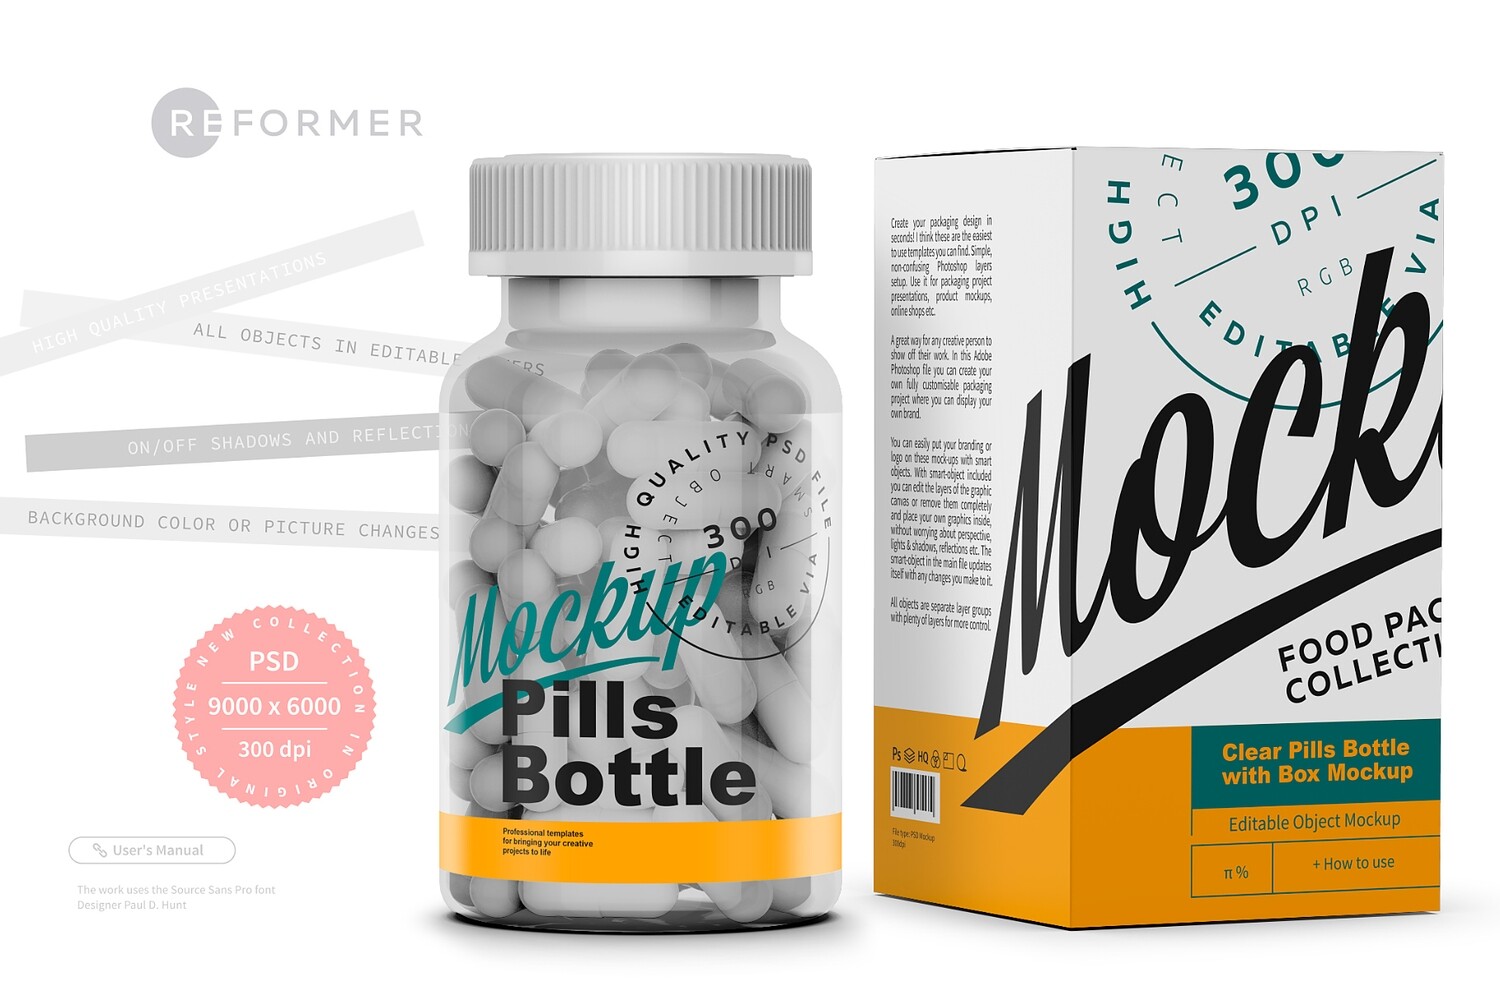 Clear Pills Bottle with Box Mockup